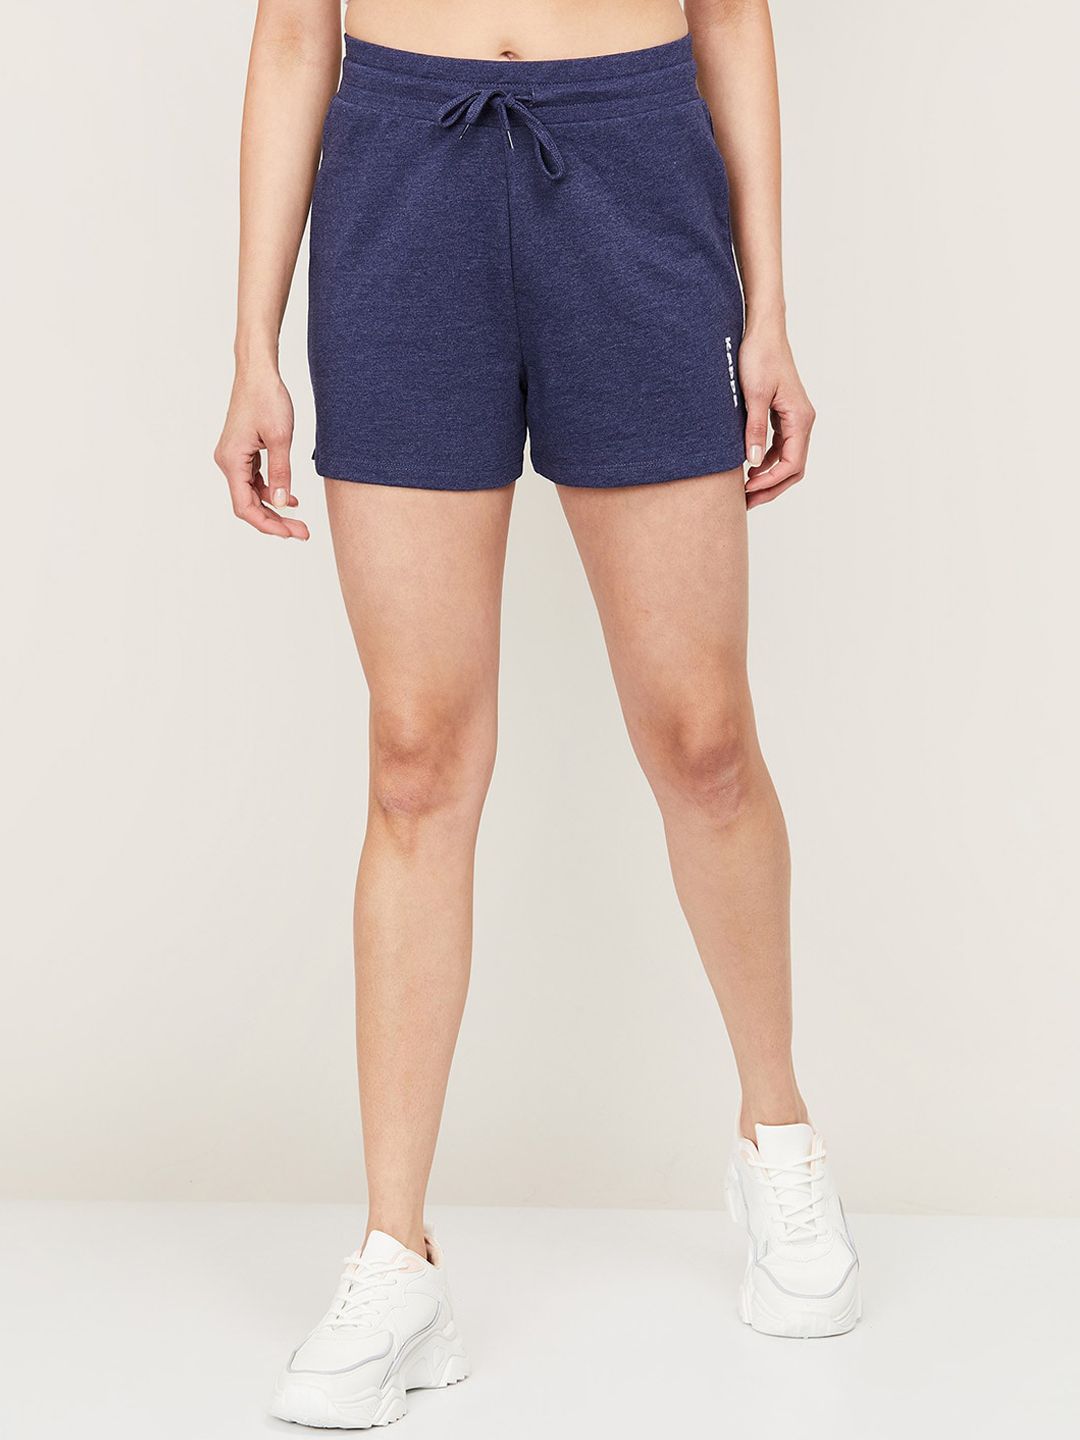 Kappa Women Blue High-Rise Training or Gym Shorts Price in India